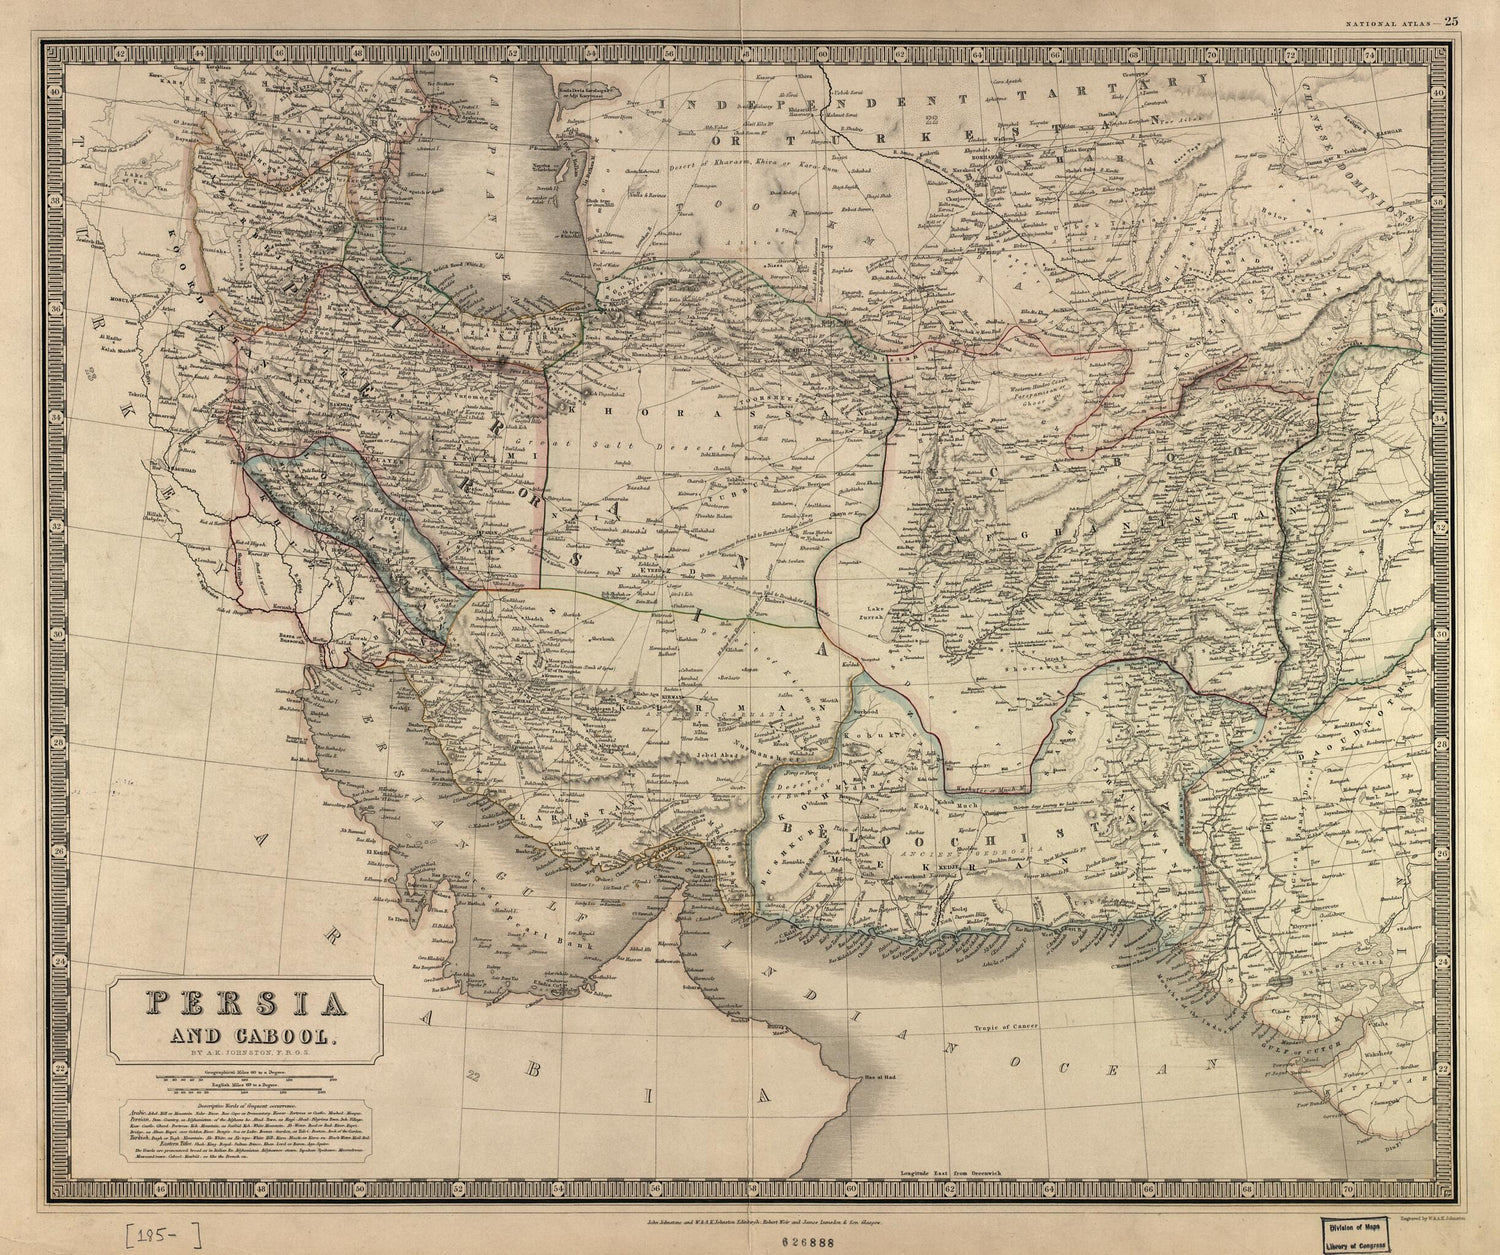 This old map of Persia and Cabool from 1850 was created by Alexander Keith Johnston in 1850